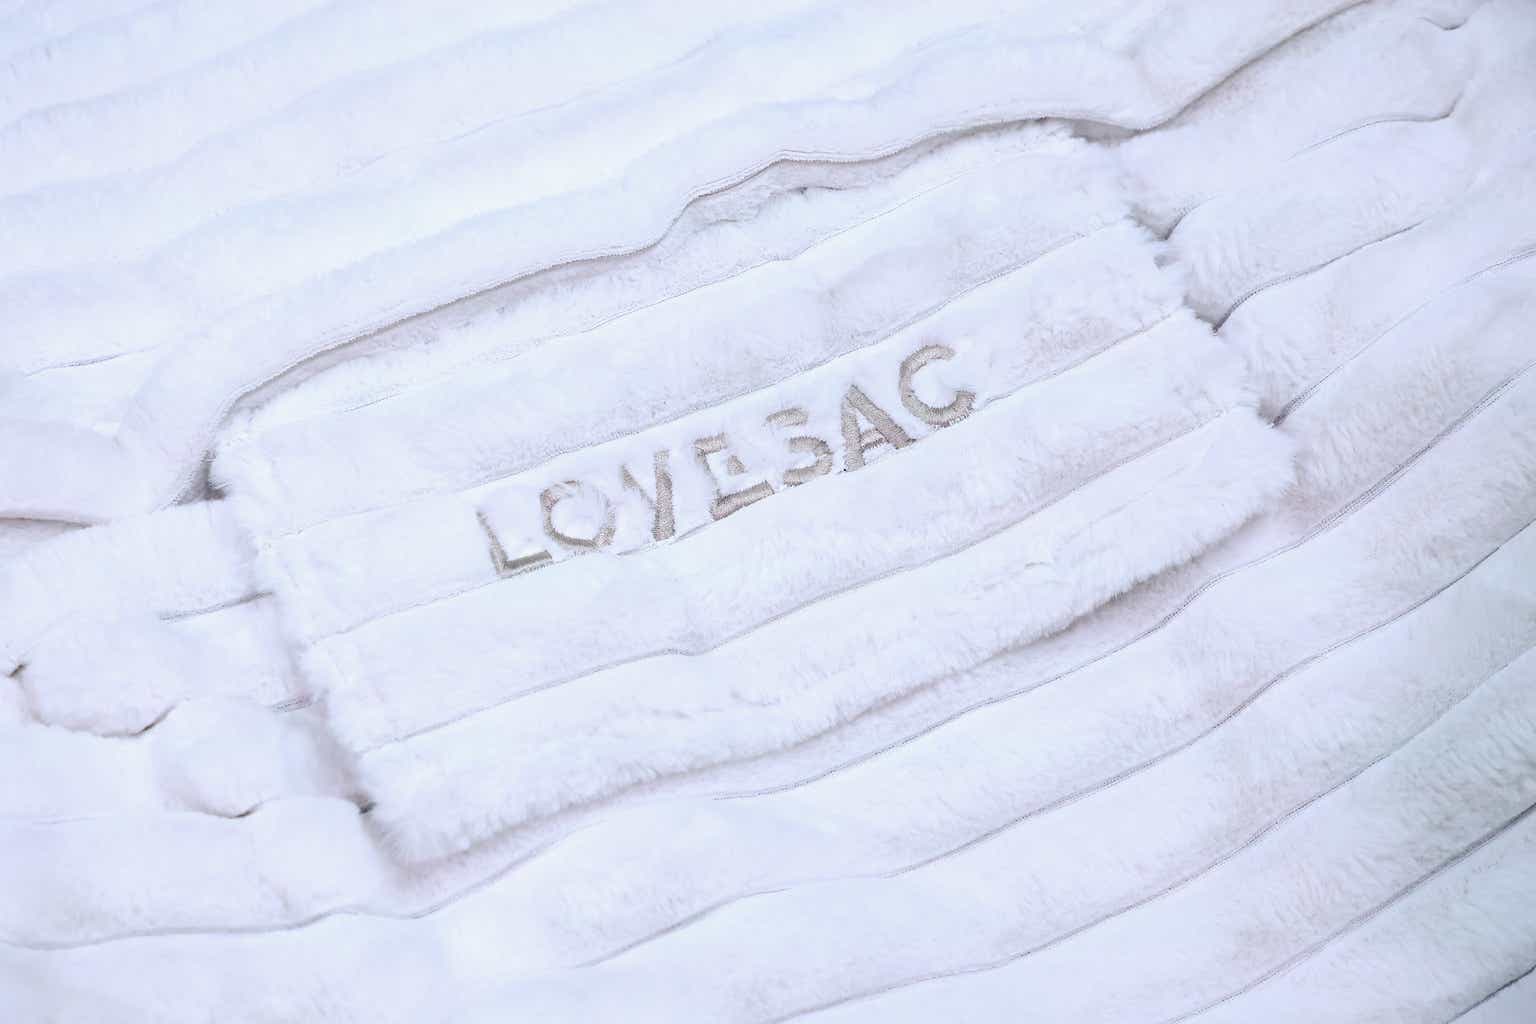 Xbox Partners With Lovesac For New Themed Seat